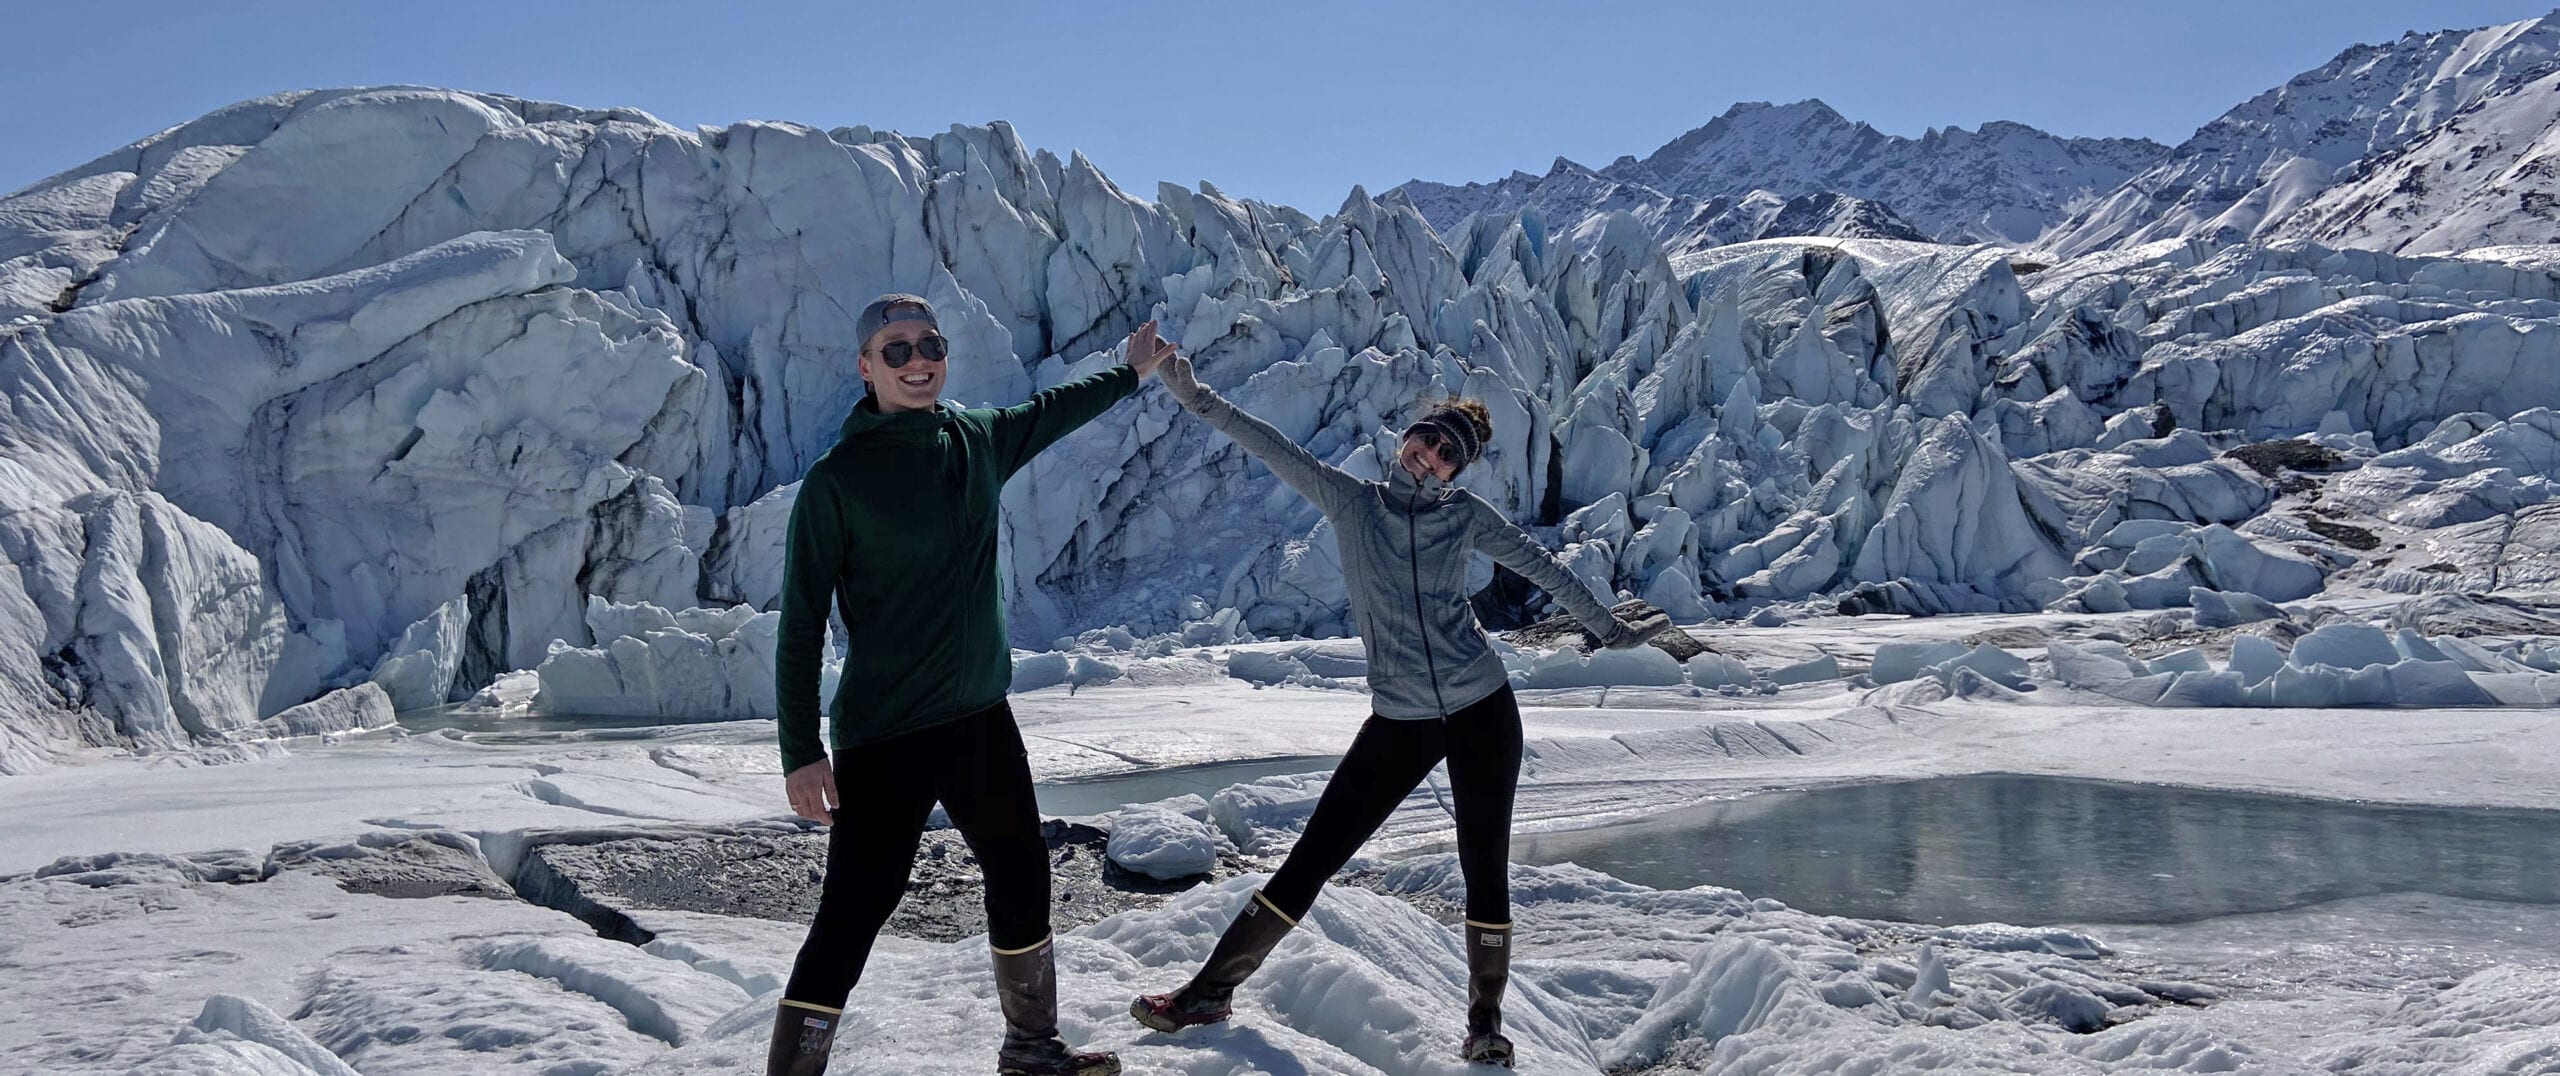 A Matanuska Glacier tour is the perfect opportunity to make unforgettable memories with those you love the most.